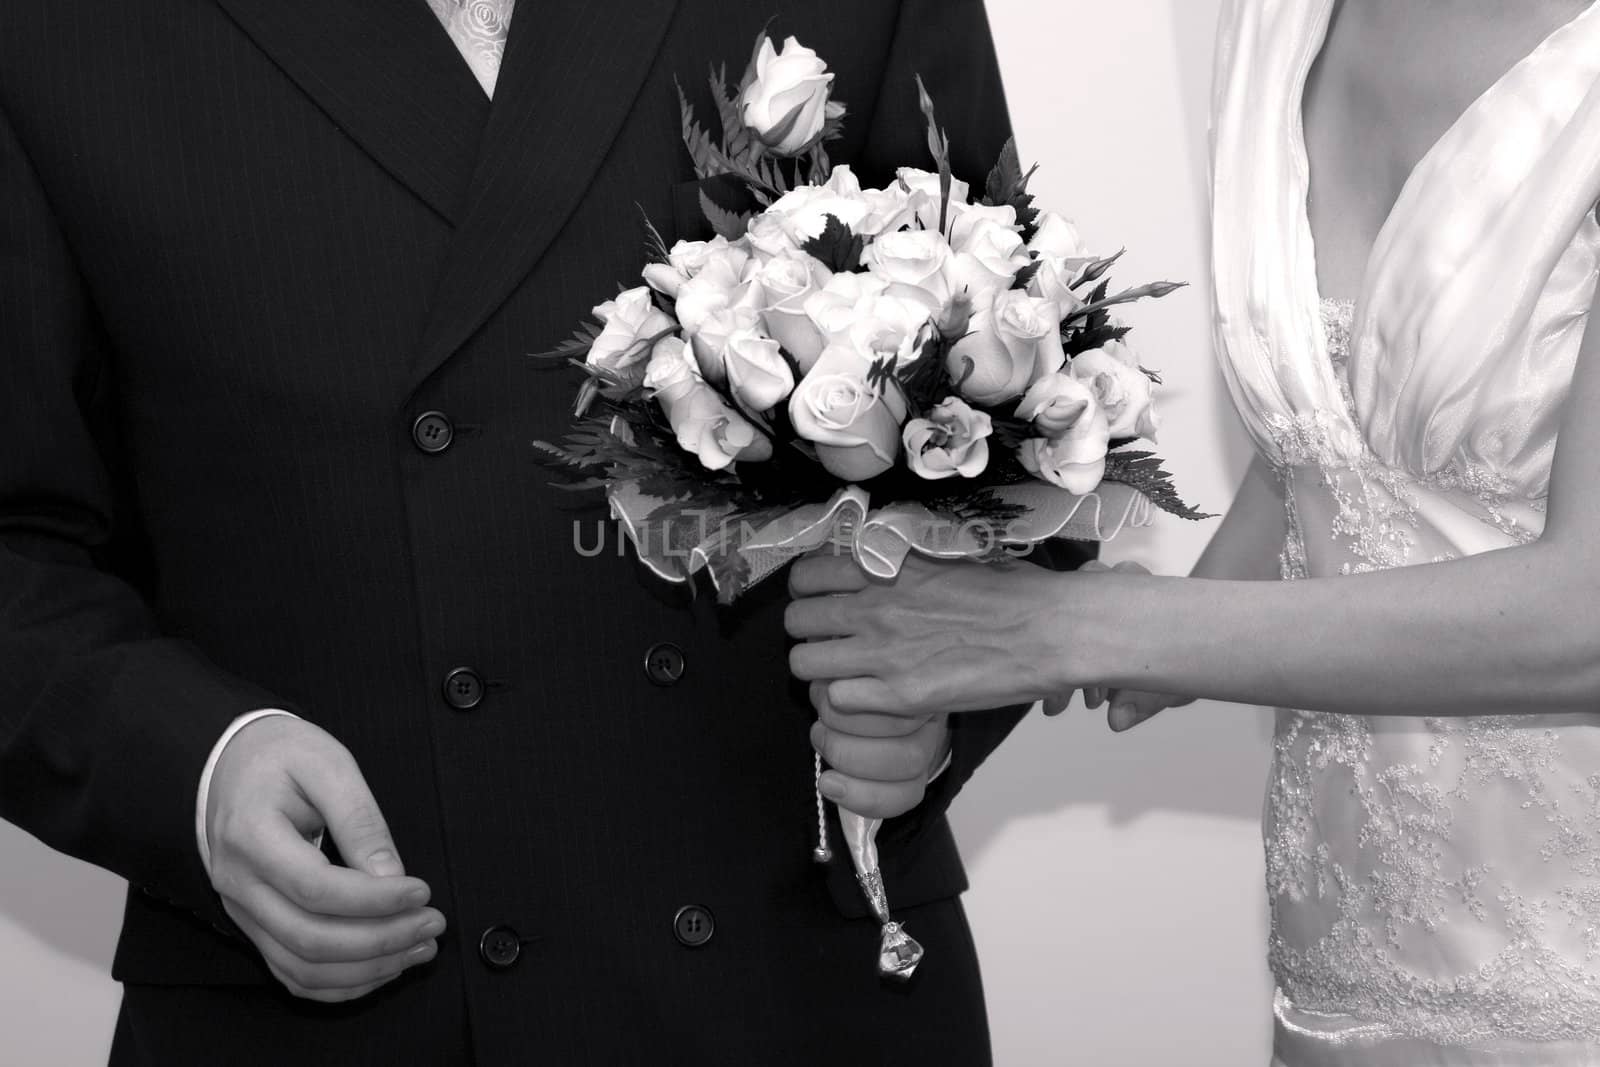 Bride and groom with a wedding bouquet